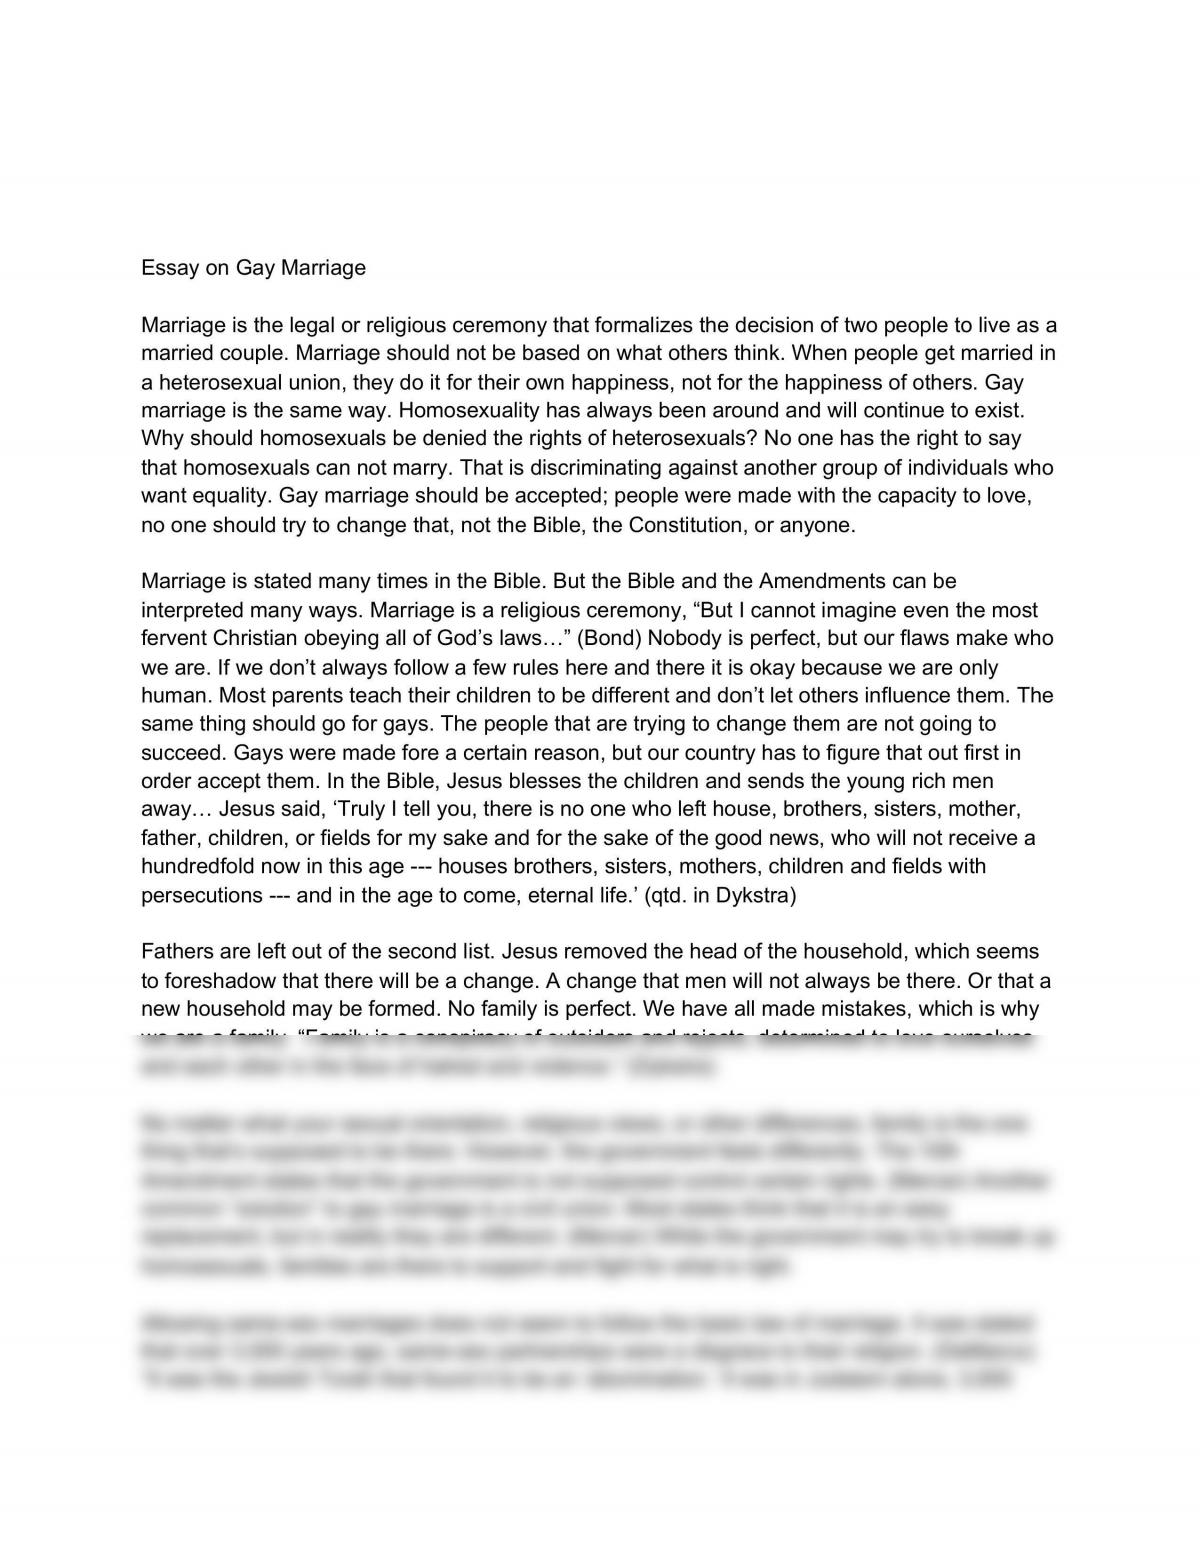 Essay on Gay Marriage - Page 1